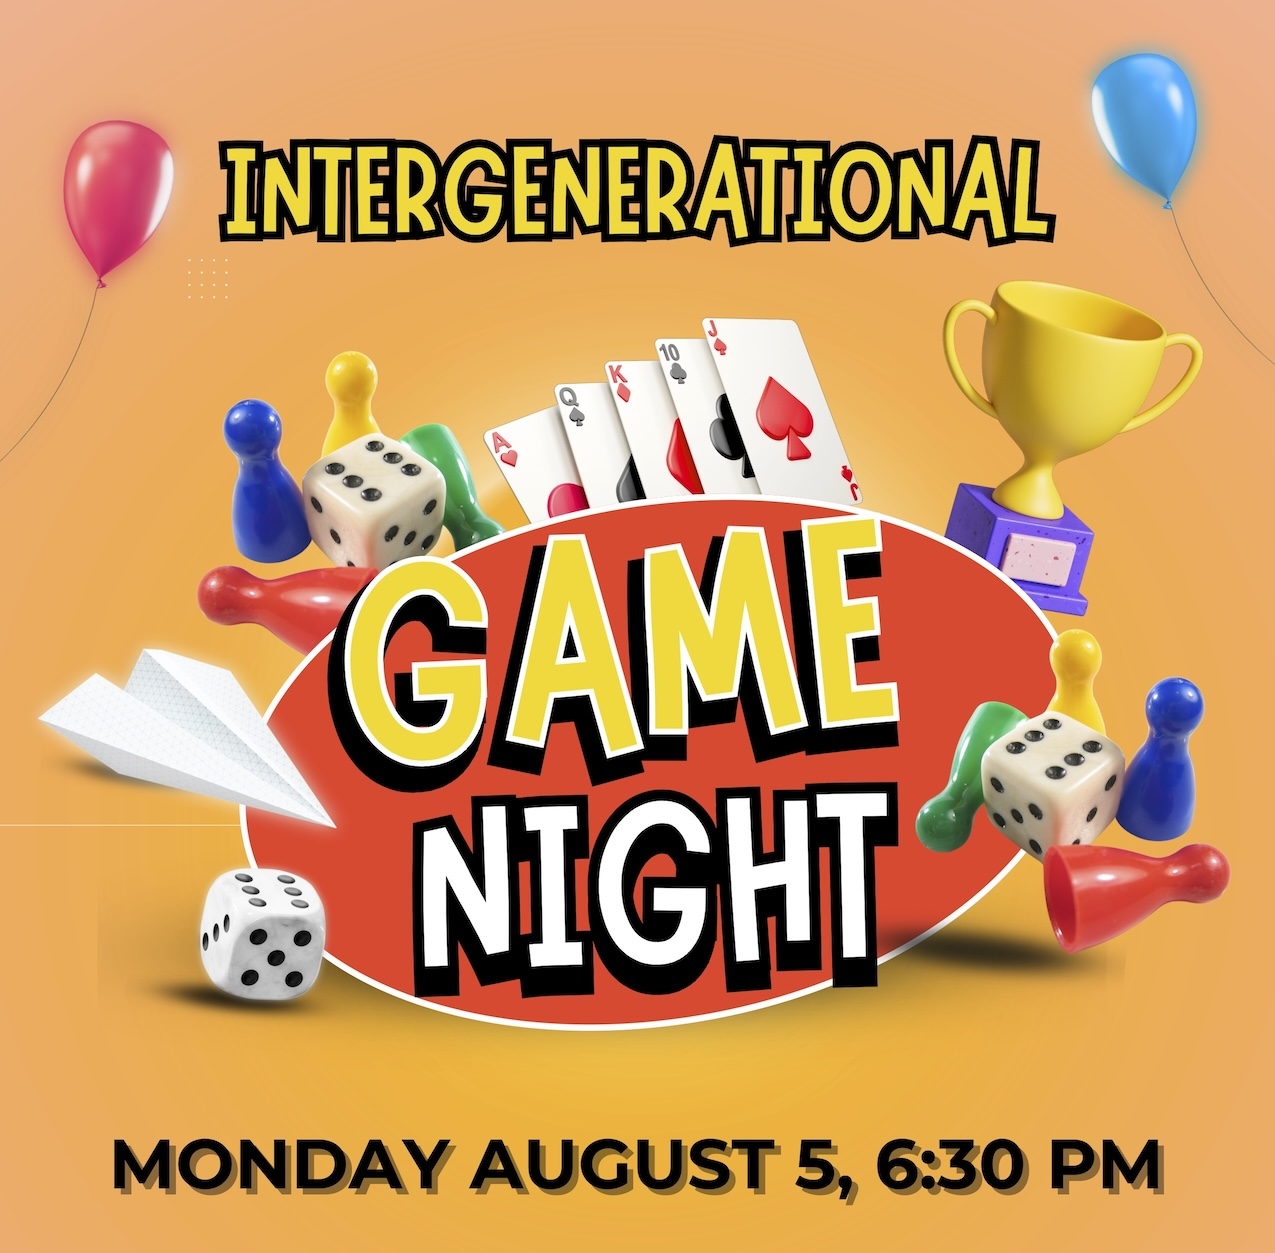 Intergenerational Game Night at PCOL, August 5